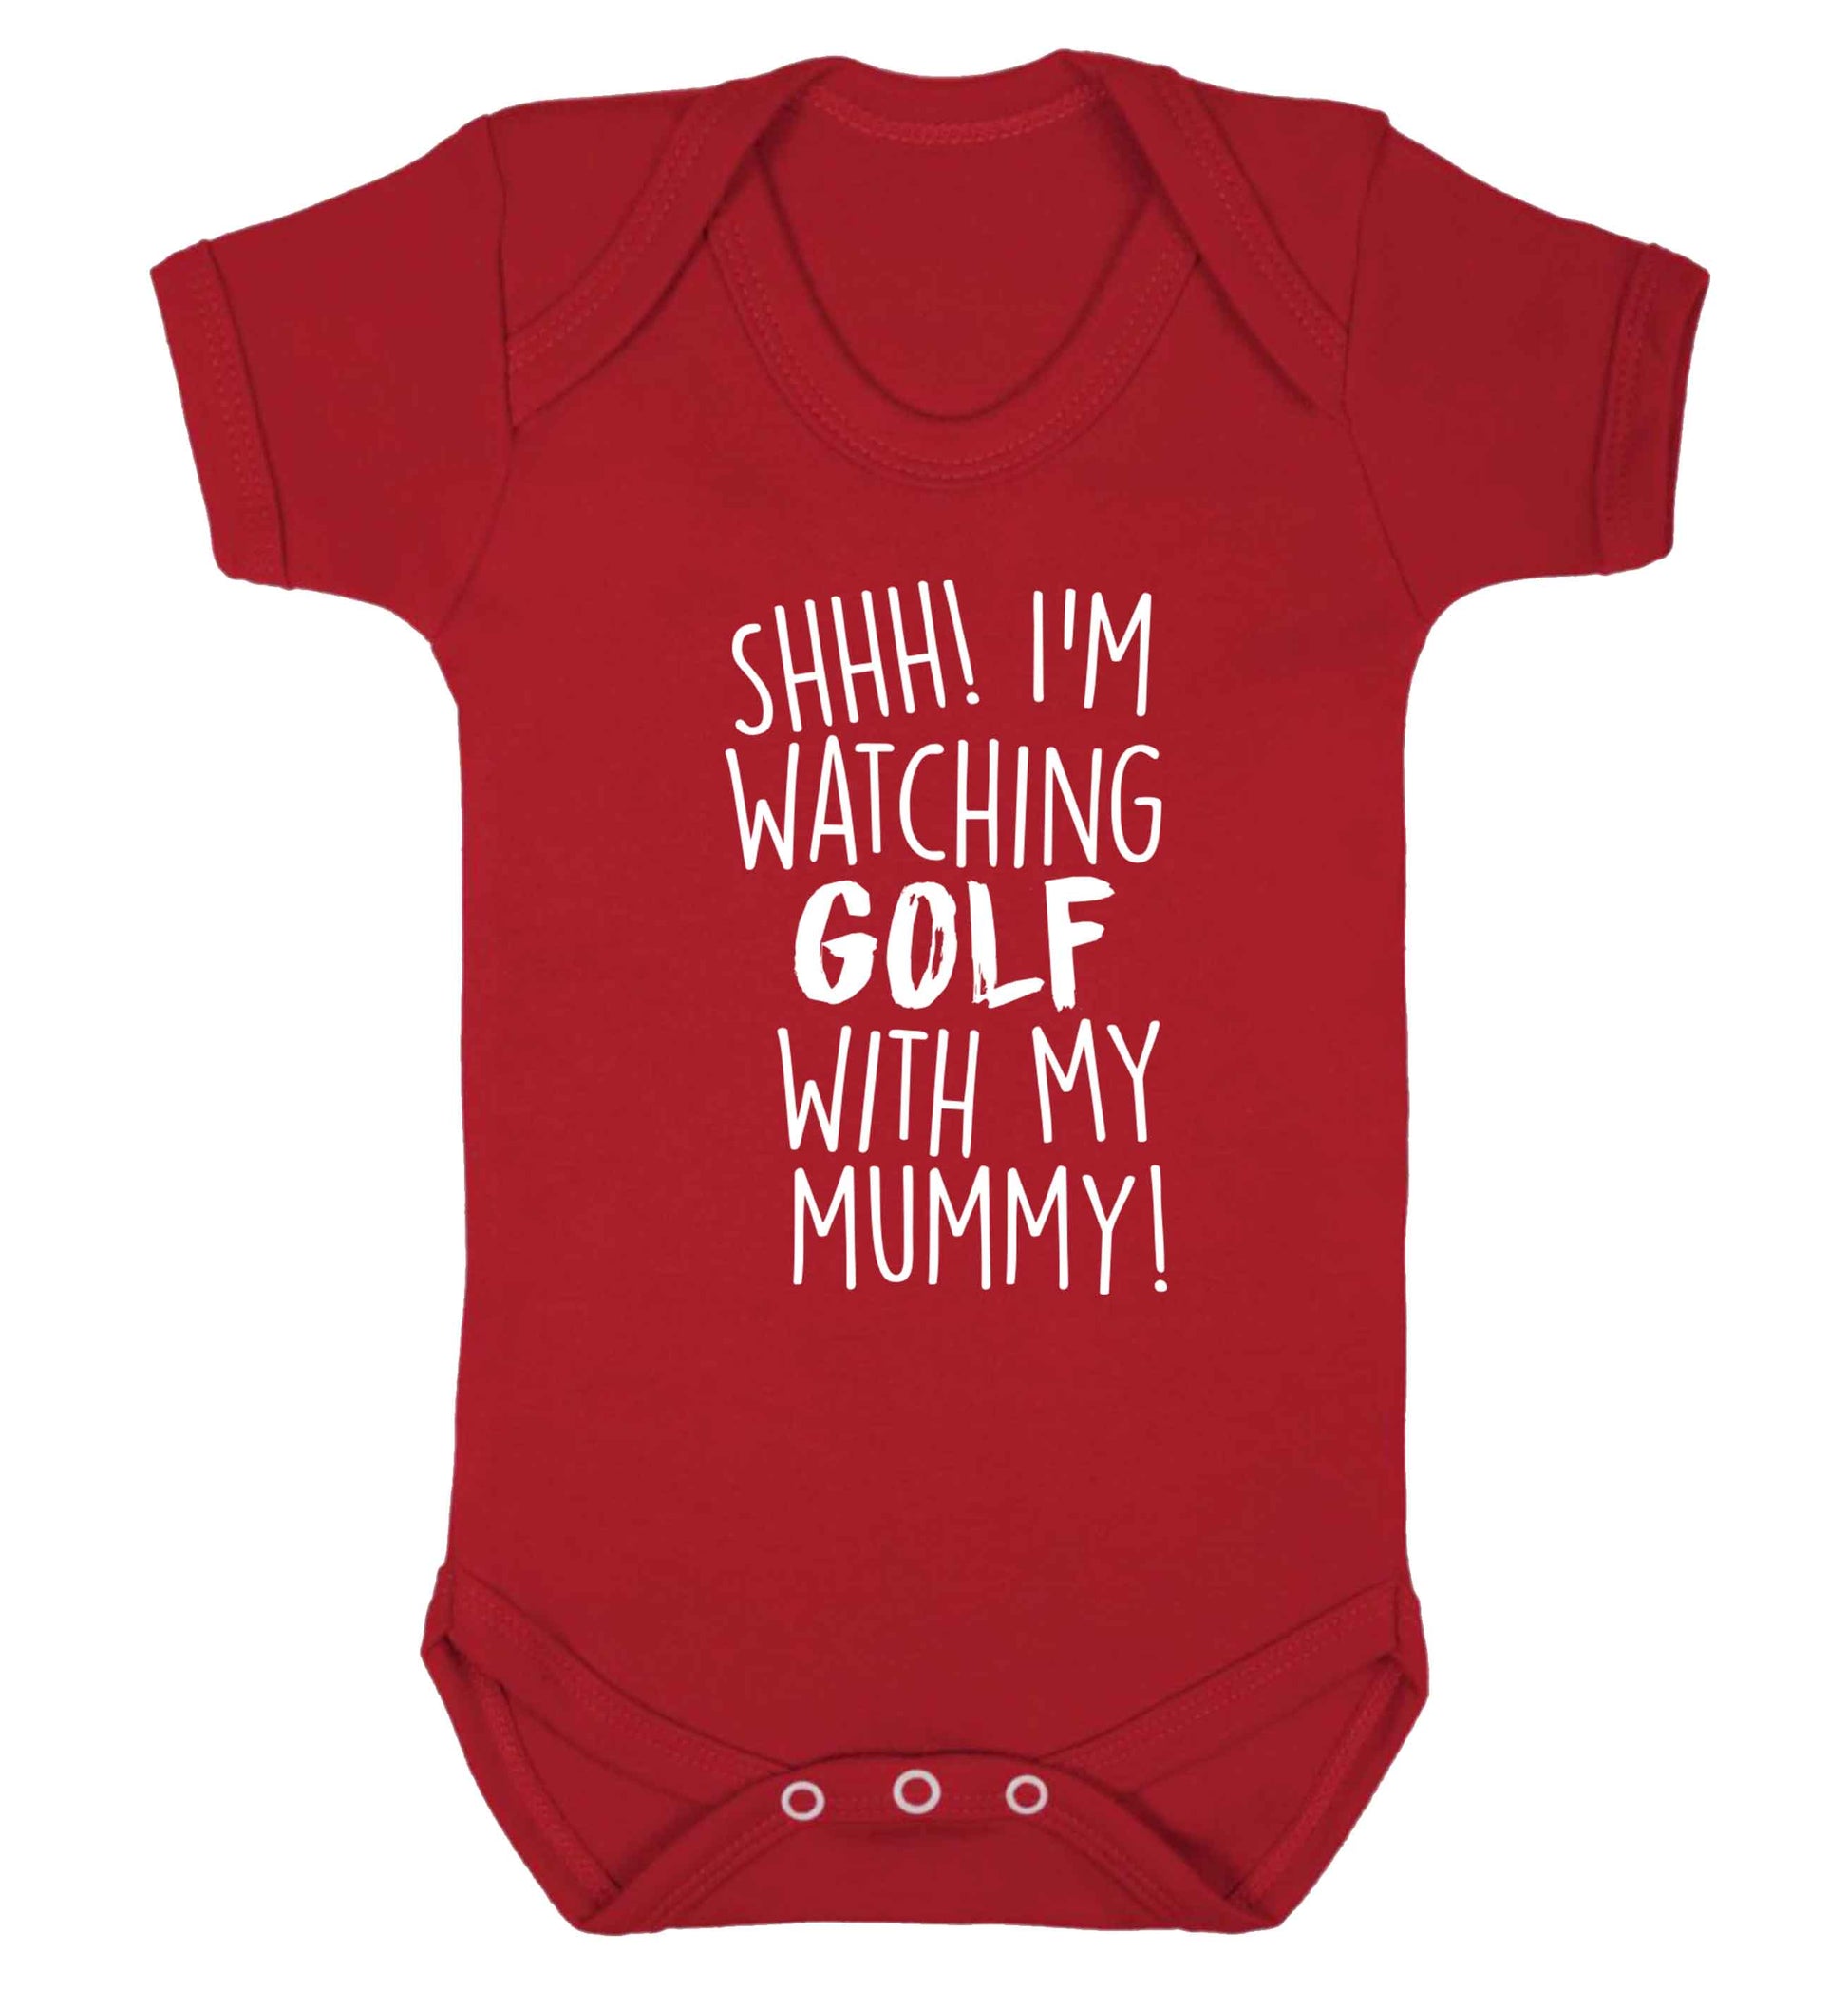 Shh I'm watching golf with my mummy Baby Vest red 18-24 months